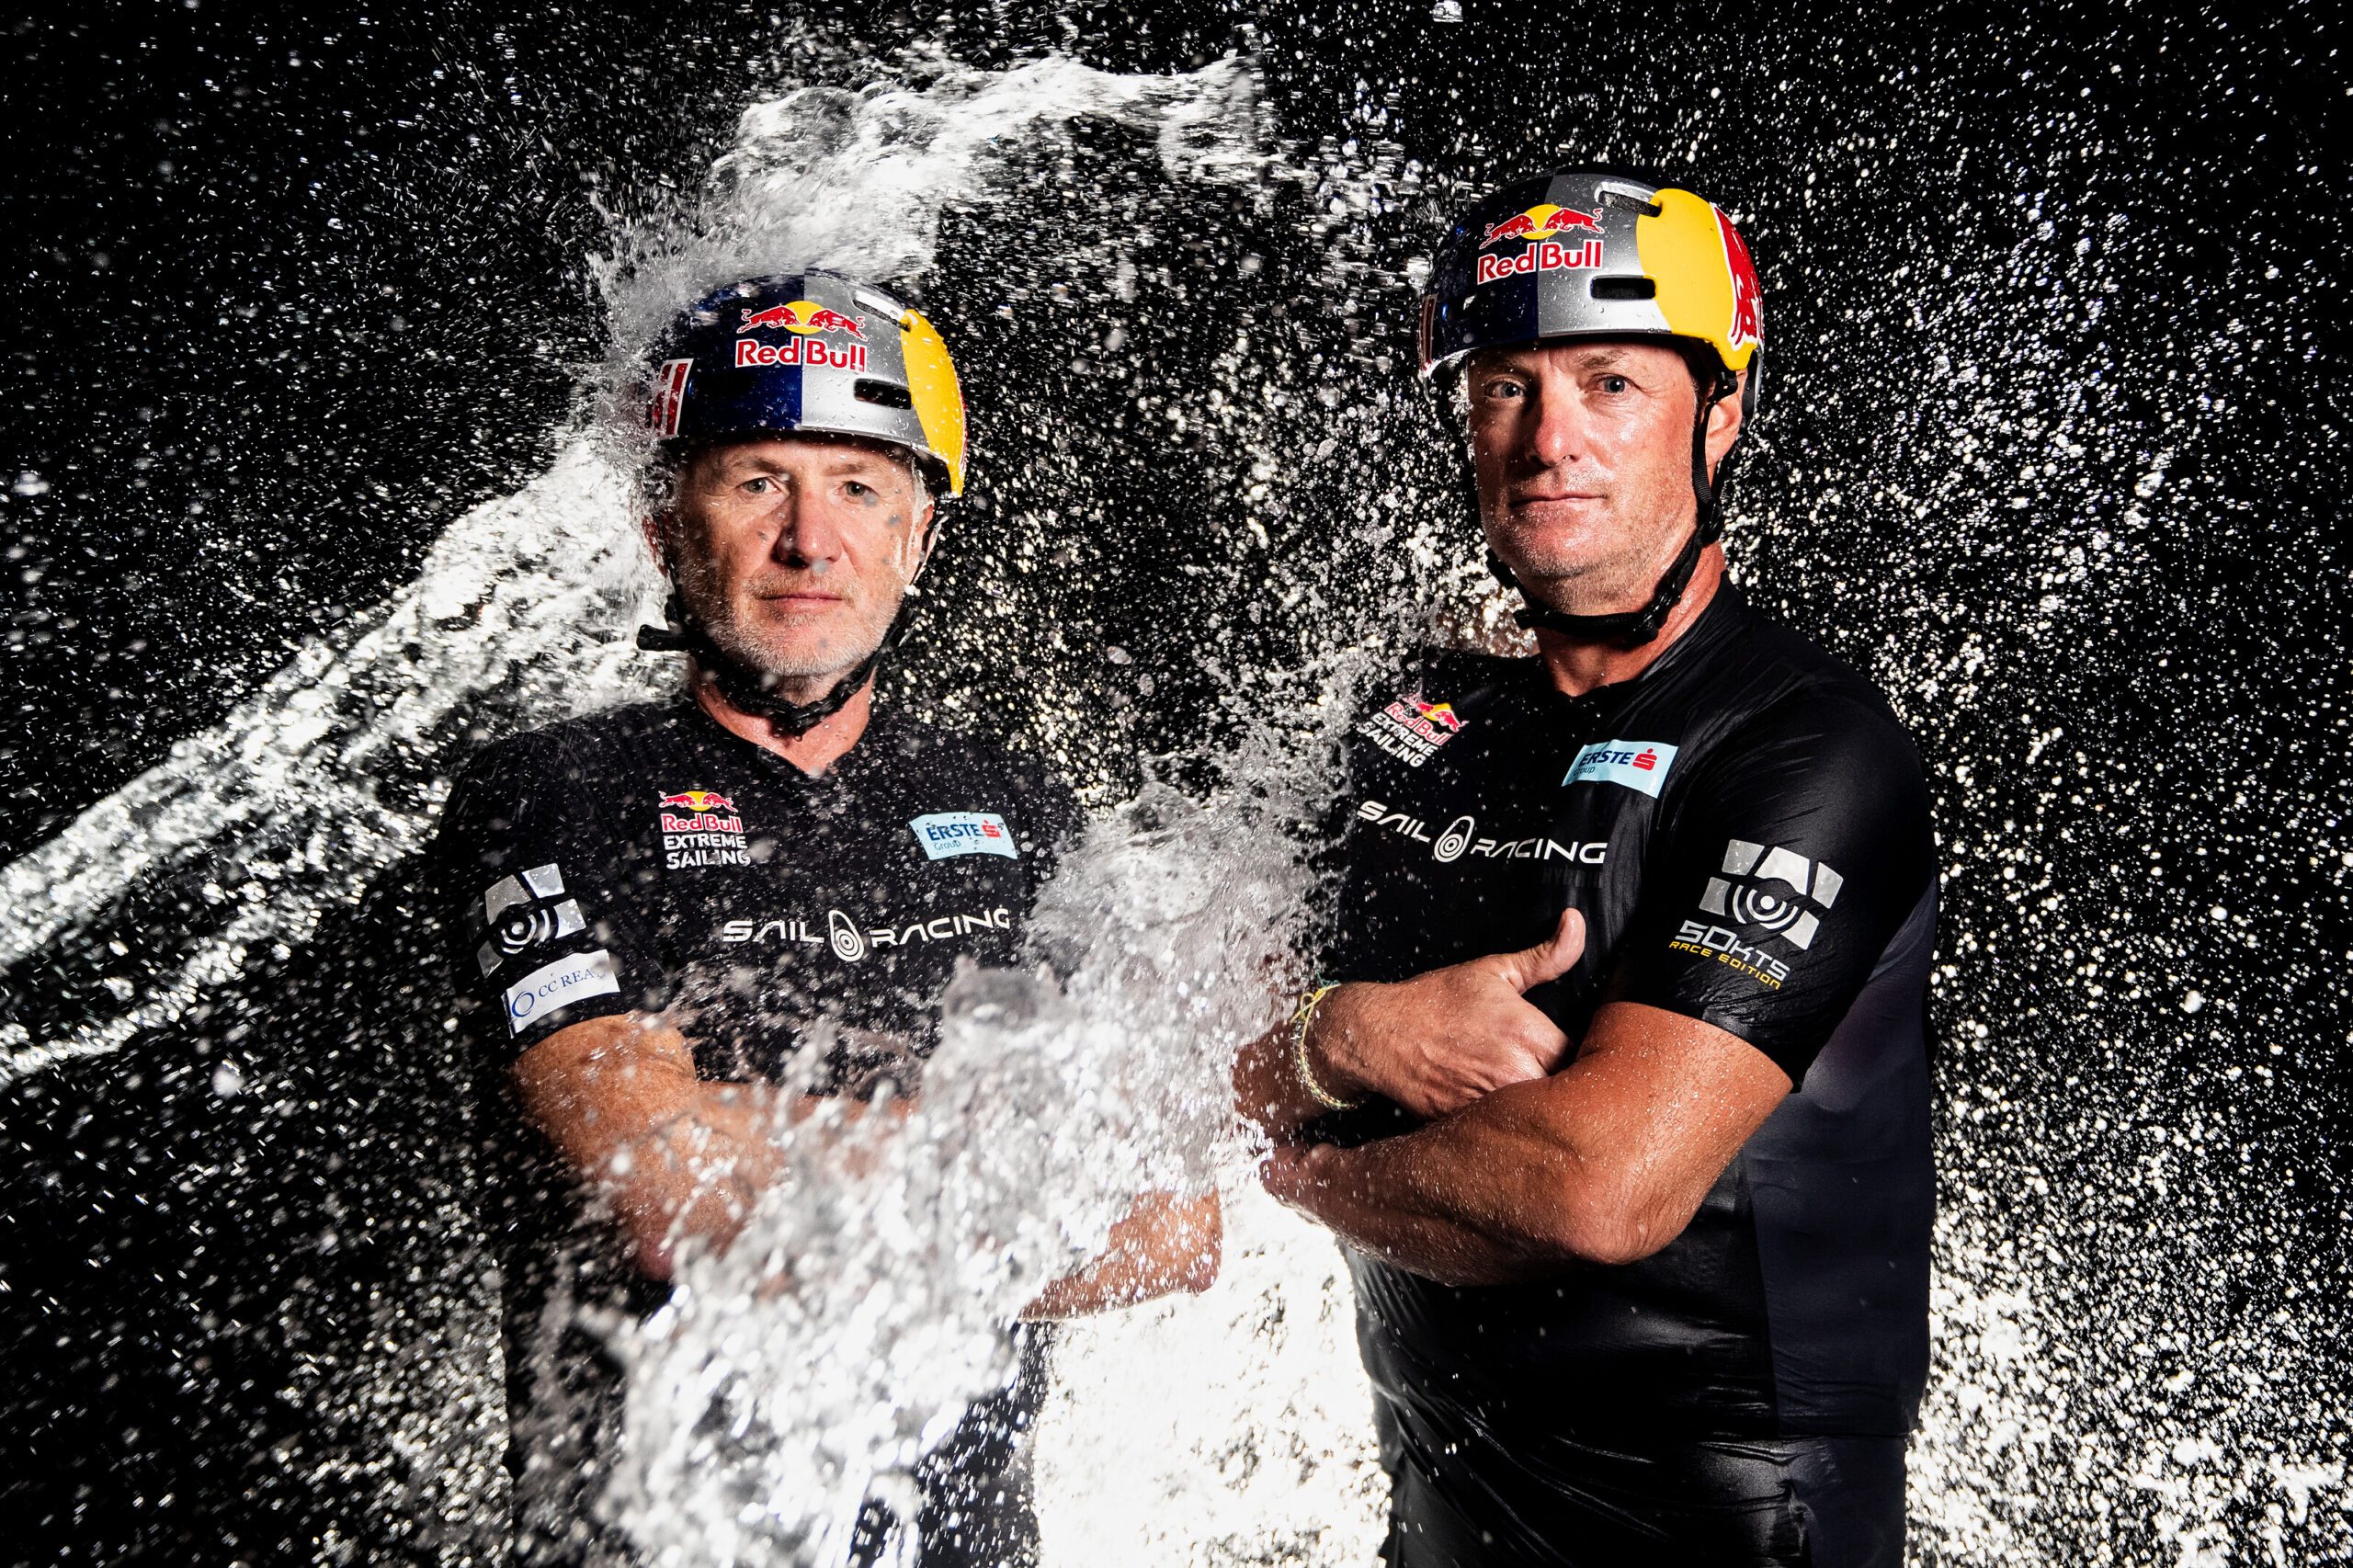 Double olympic gold medalists Roman Hagara and Hans Peter Steinacher from Austria and Red Bull Sailing Team pose for a portrait in Mussanah, Oman on February 25, 2020 // Samo Vidic/Red Bull Content Pool // AP-23BMMNJ592111 // Usage for editorial use only //